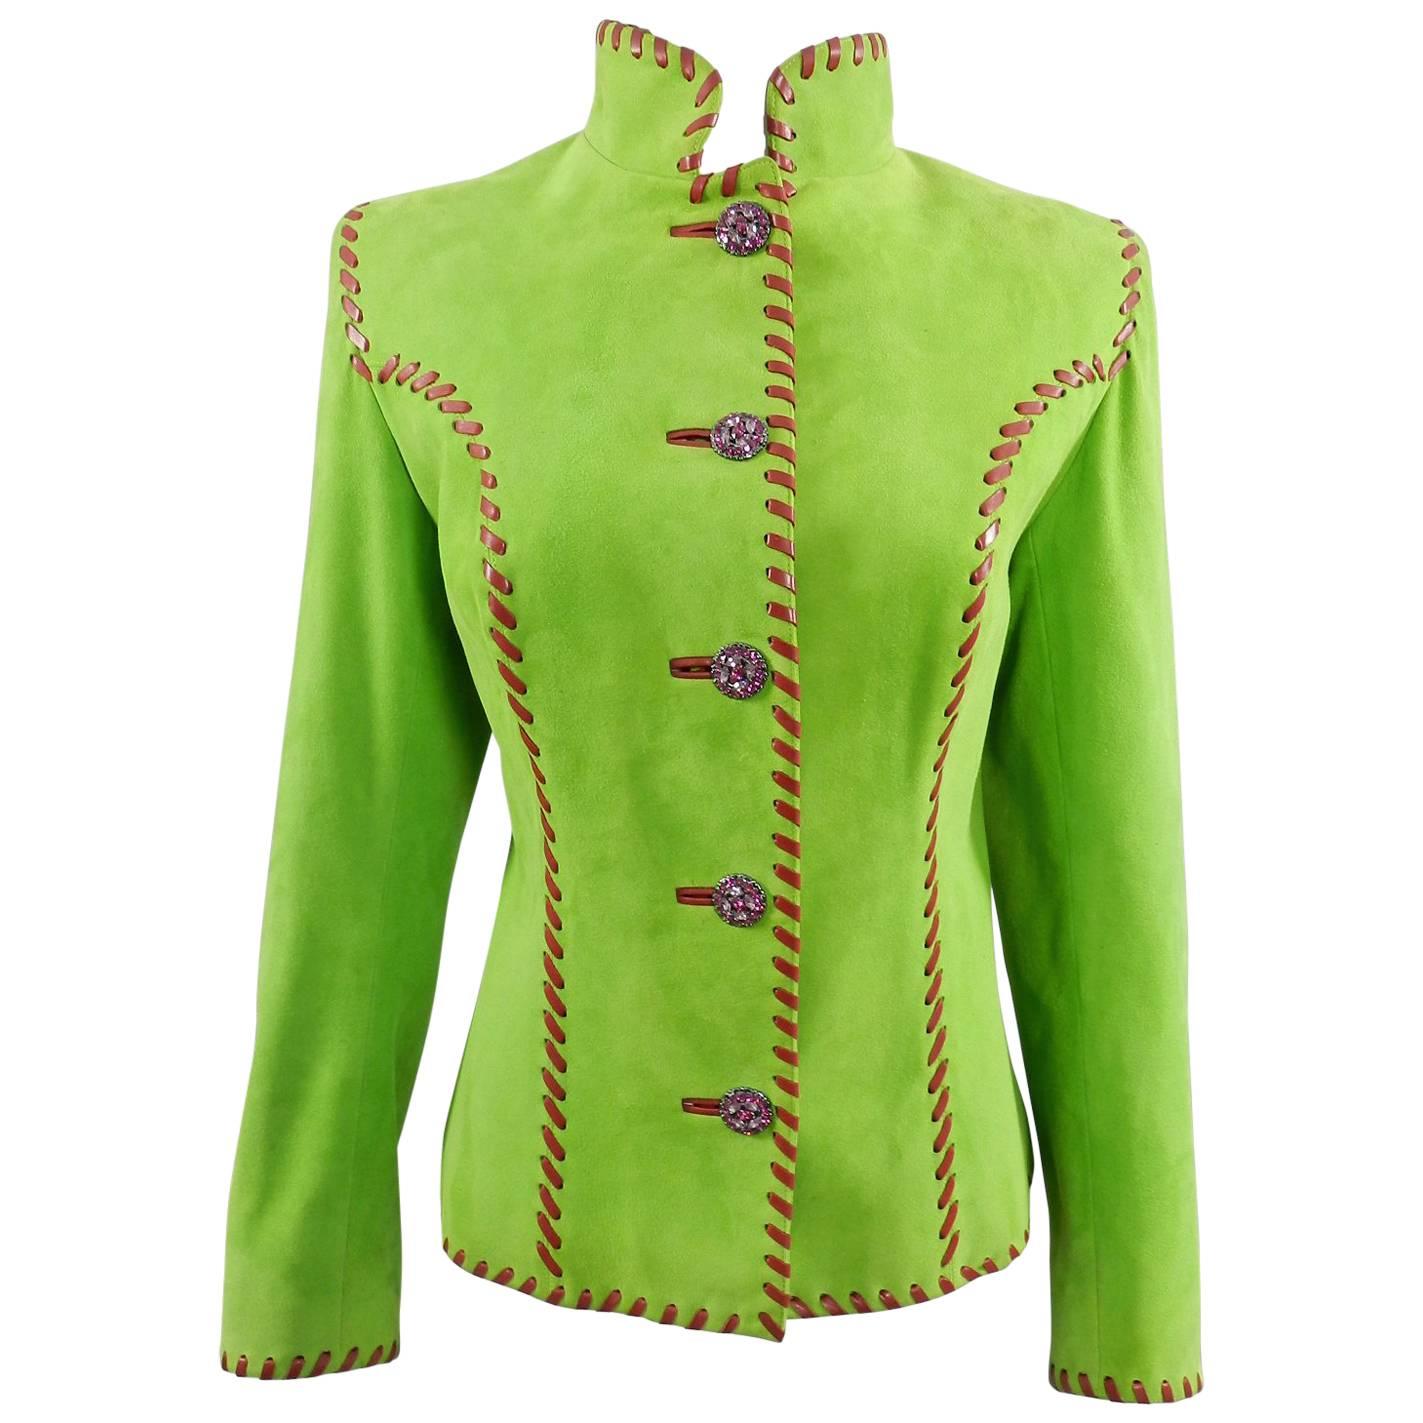 Yves Saint Laurent AW 1999 Haute Couture Lime Green and Fuchsia Suede Jacket For Sale